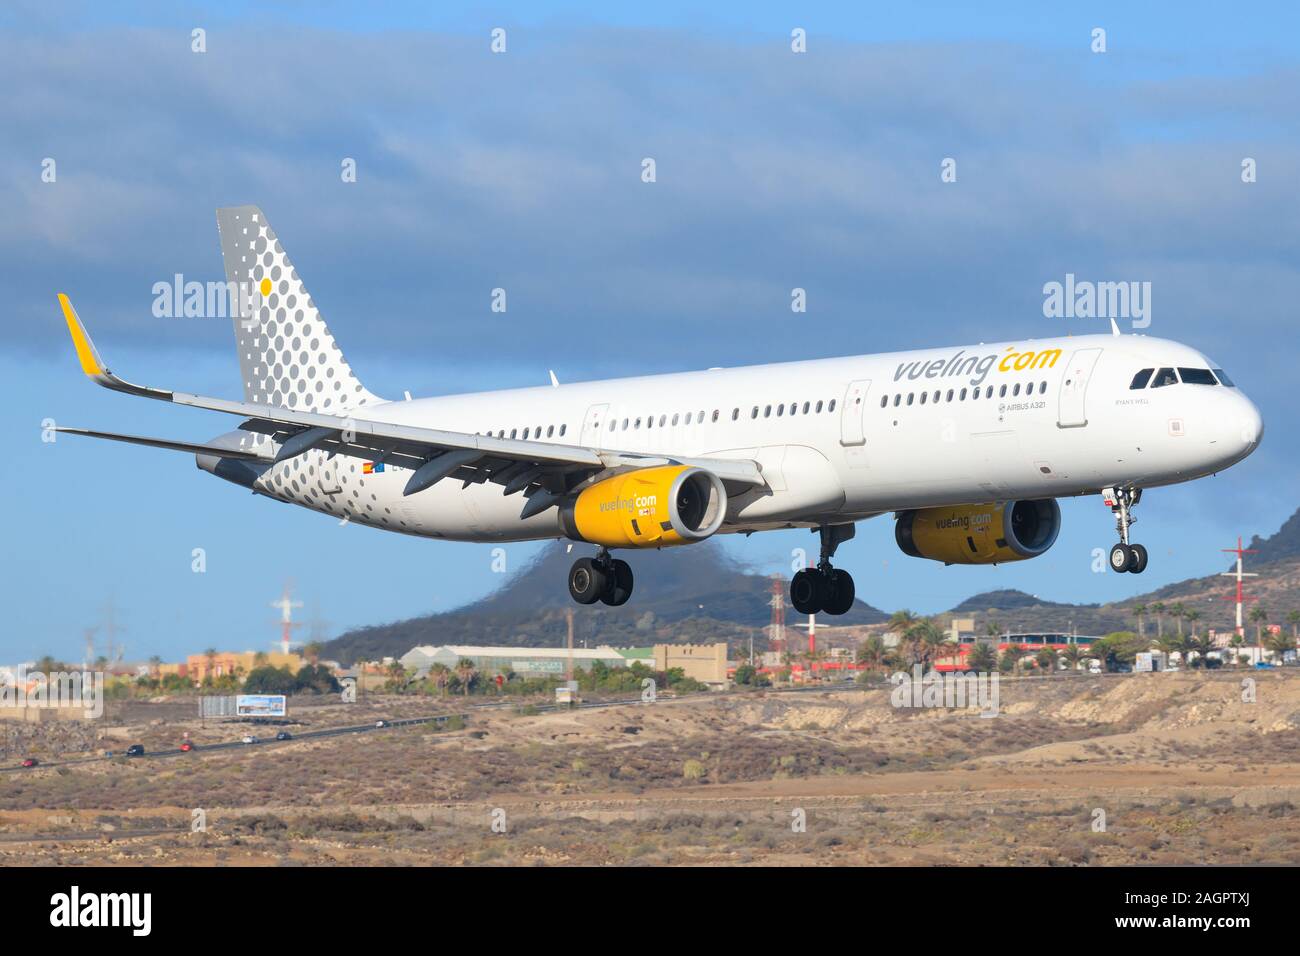 Tenerife, Spain – November 23, 2019: Vueling A320 at Tenerife South airport. Stock Photo